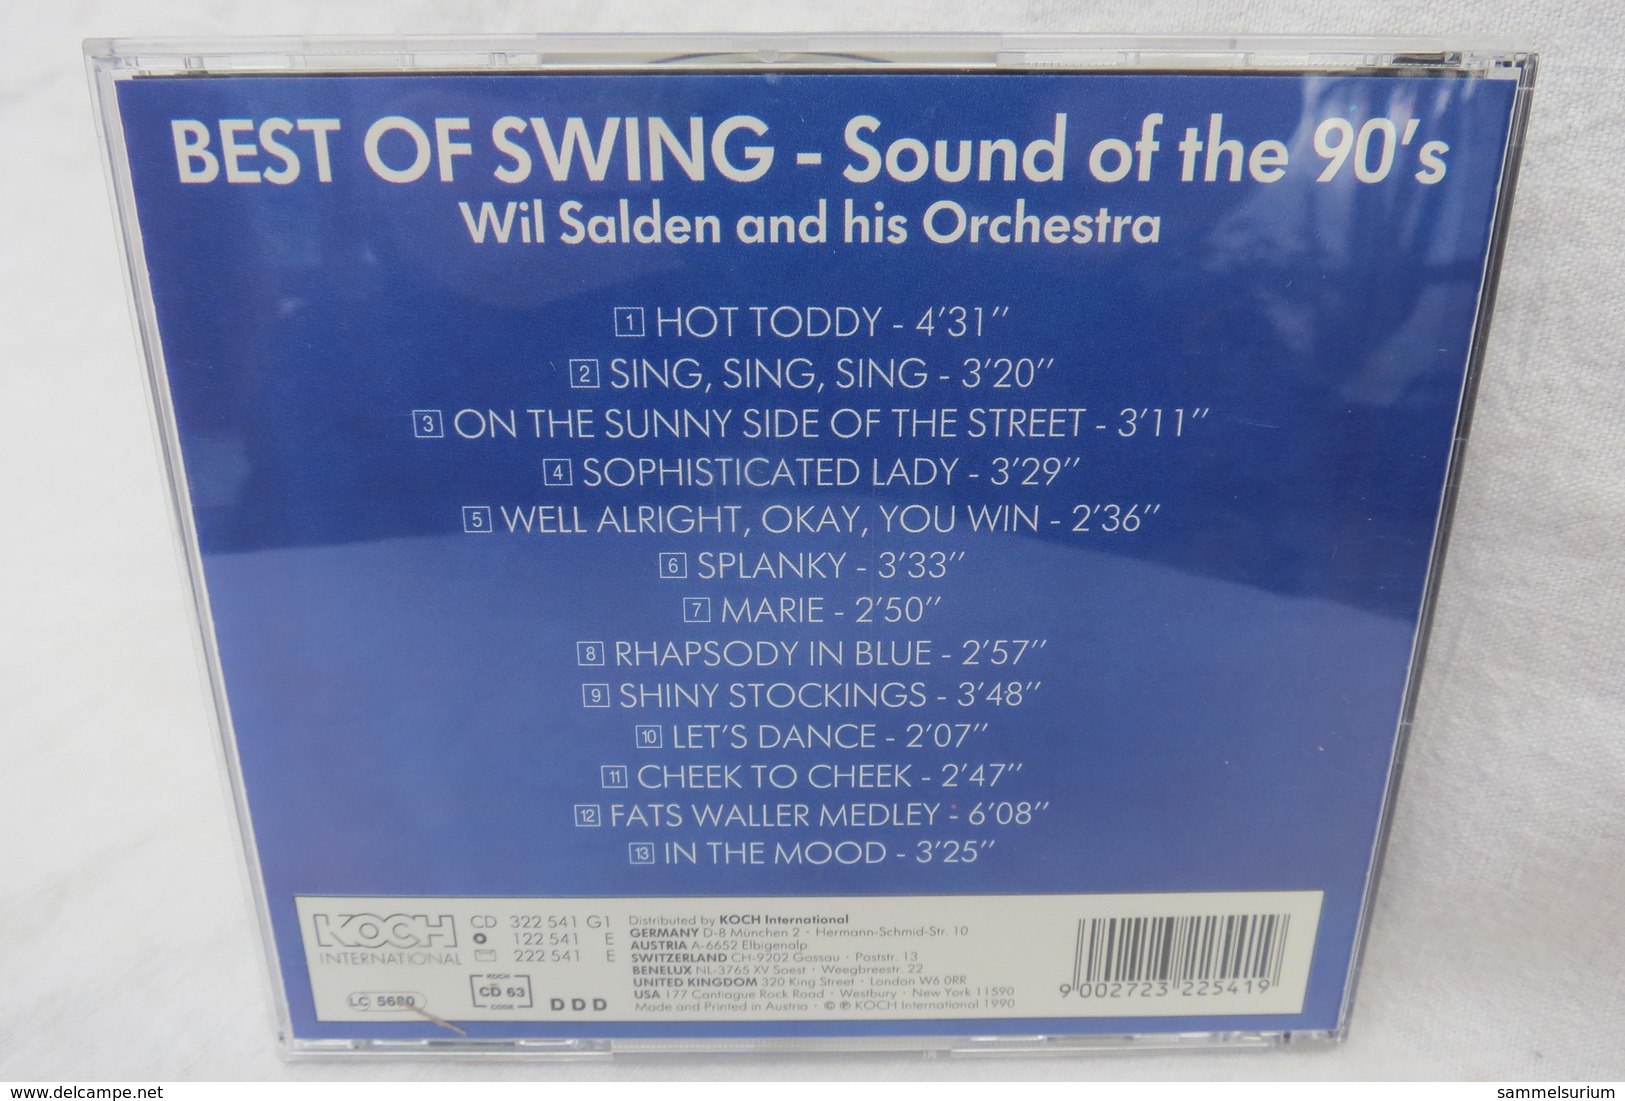 CD "Wil Salden And His Orchestra" Best Of Swing - Sound Of The 90's - Soul - R&B